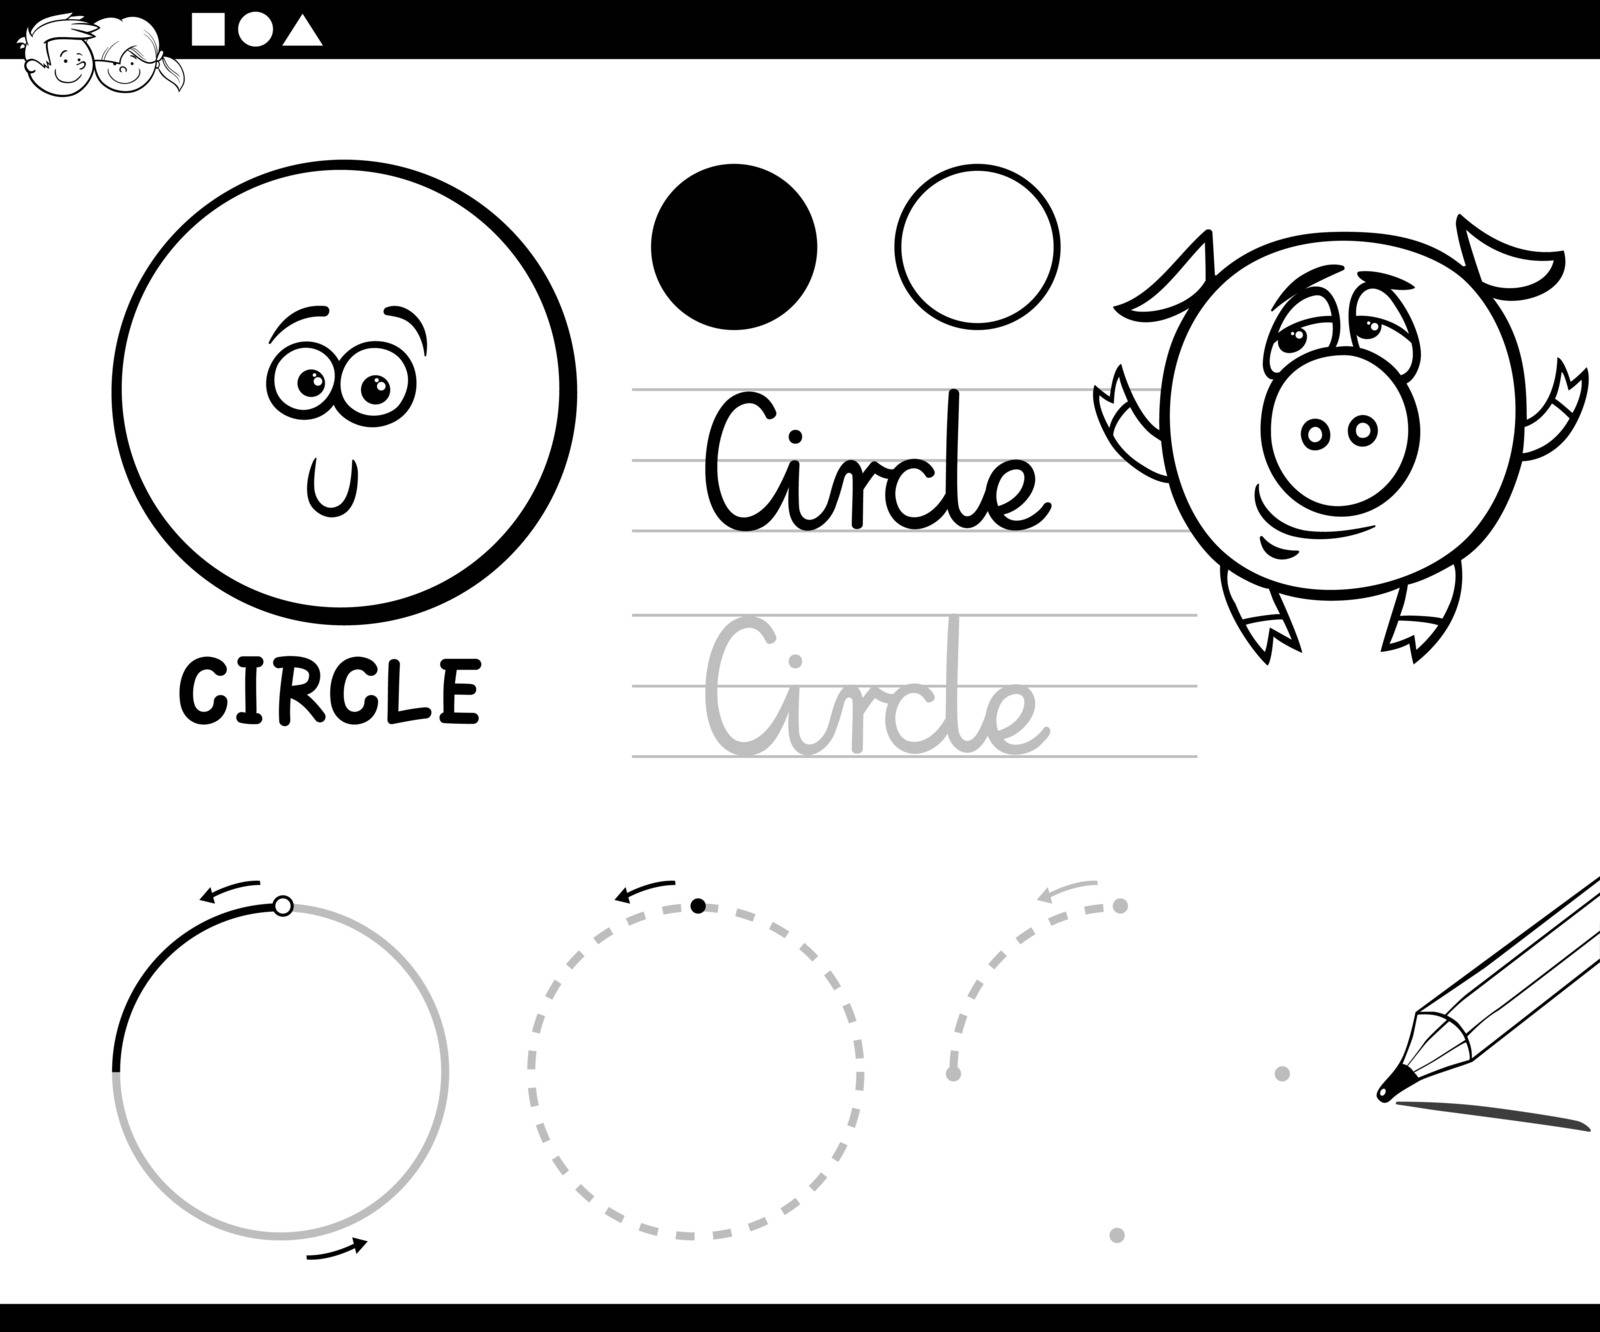 Black and White Educational Cartoon Illustration of Circle Basic Geometric Shape for Children Coloring Page